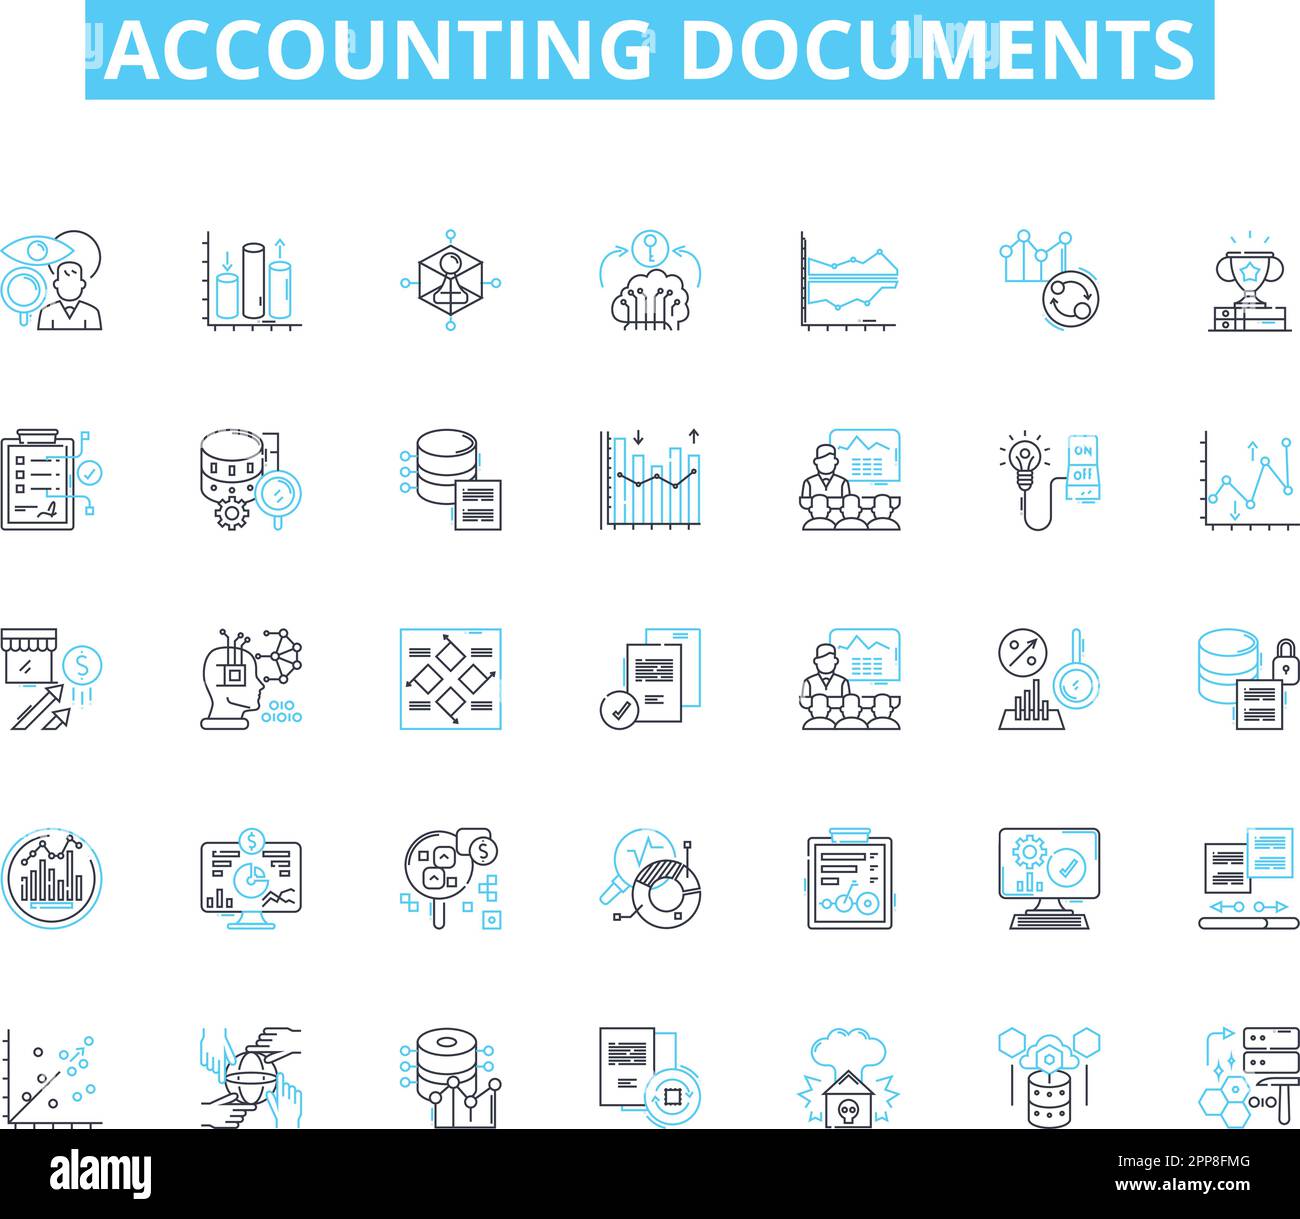 Accounting documents linear icons set. Ledger, Journal, Balance sheet, Income statement, Cash flow statement, Tax return, Invoice line vector and Stock Vector